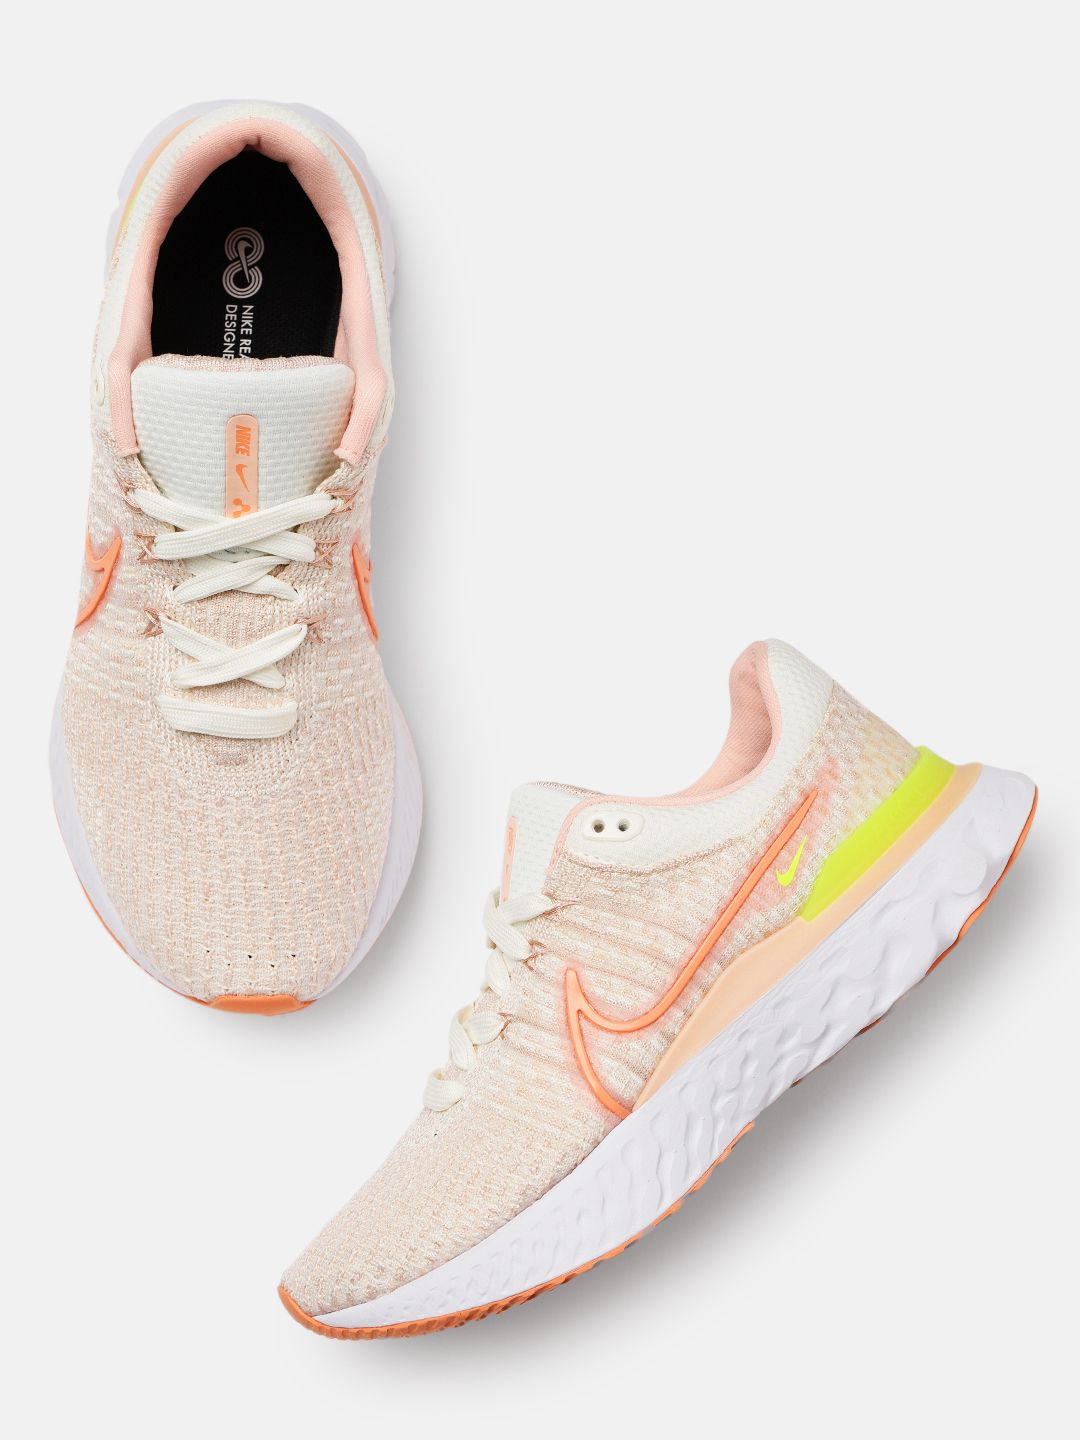 Nike Women Peach-Coloured REACT INFINITY FK 3 Running Shoes Price in India